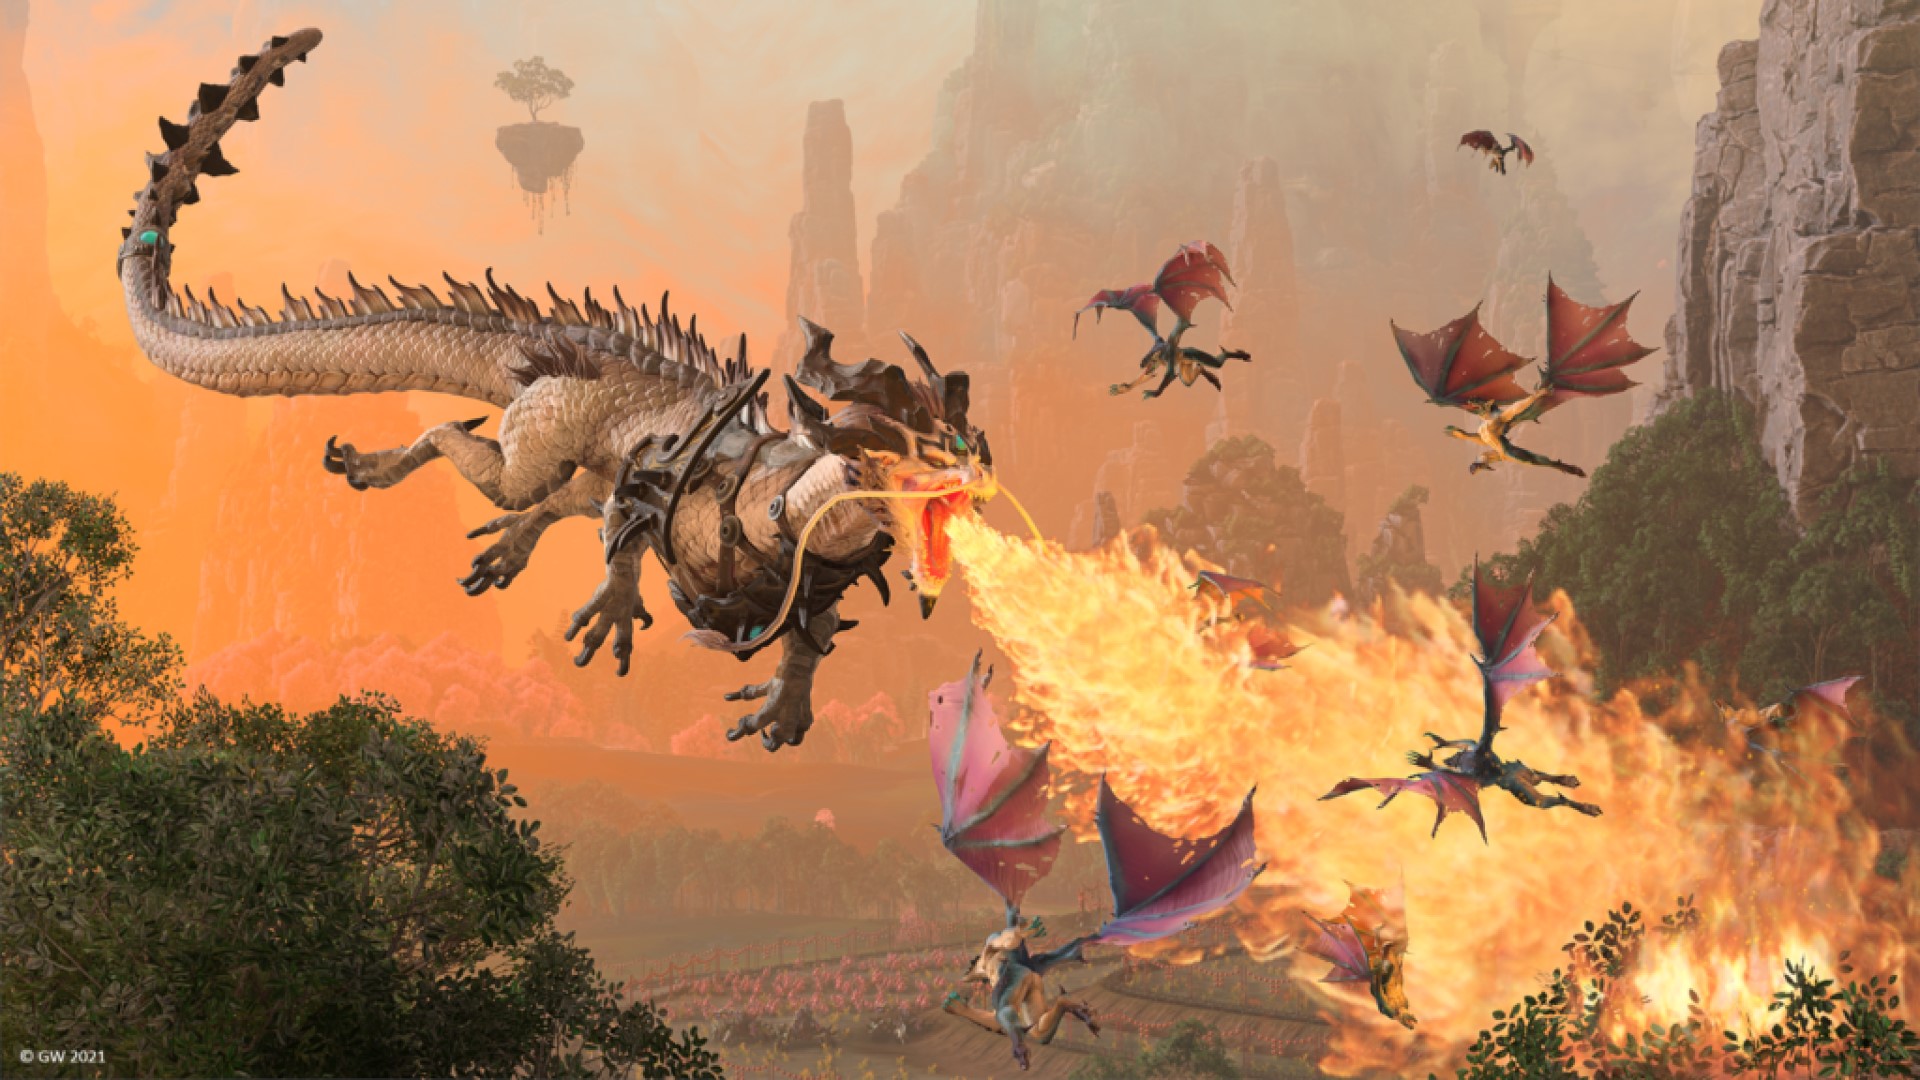 Total Warhammer 3 reveals Cathay's launch lords: a pair of dragon demi-gods